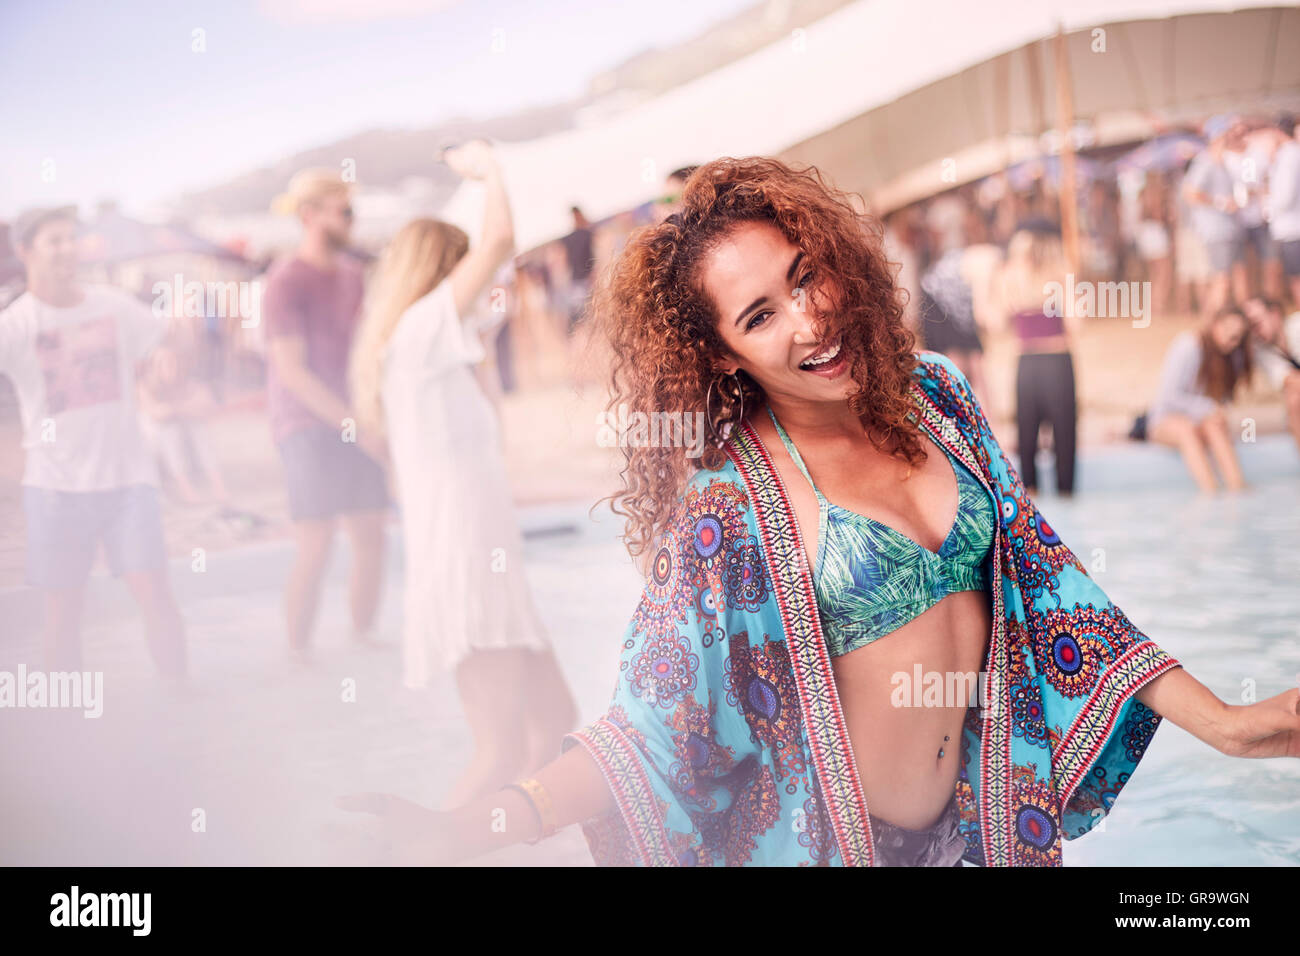 Portrait young woman dancing at poolside party Stock Photo